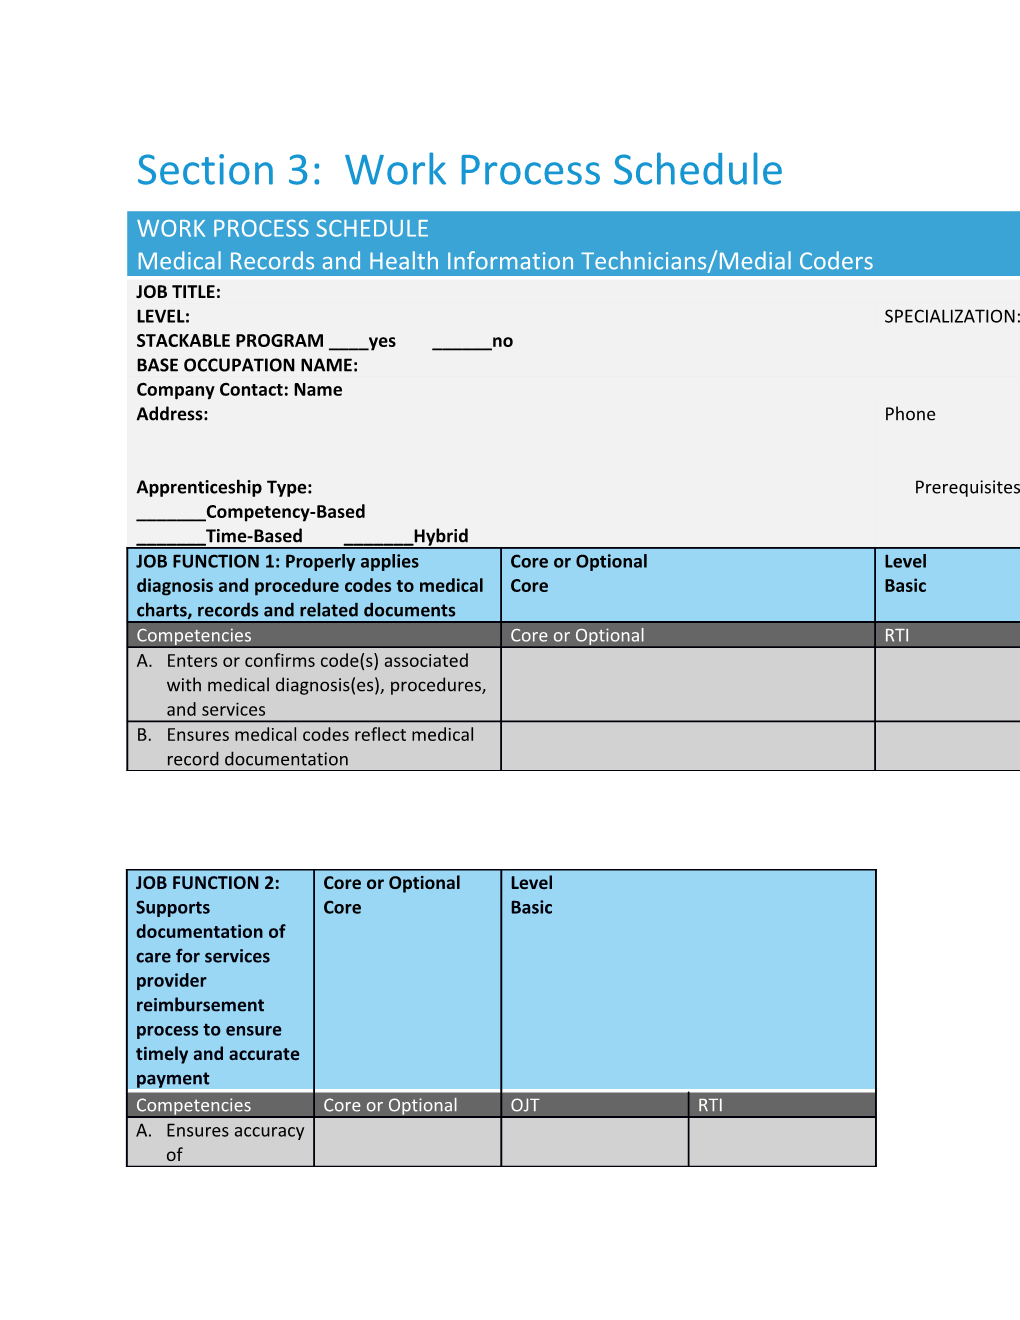 Section 3: Work Process Schedule